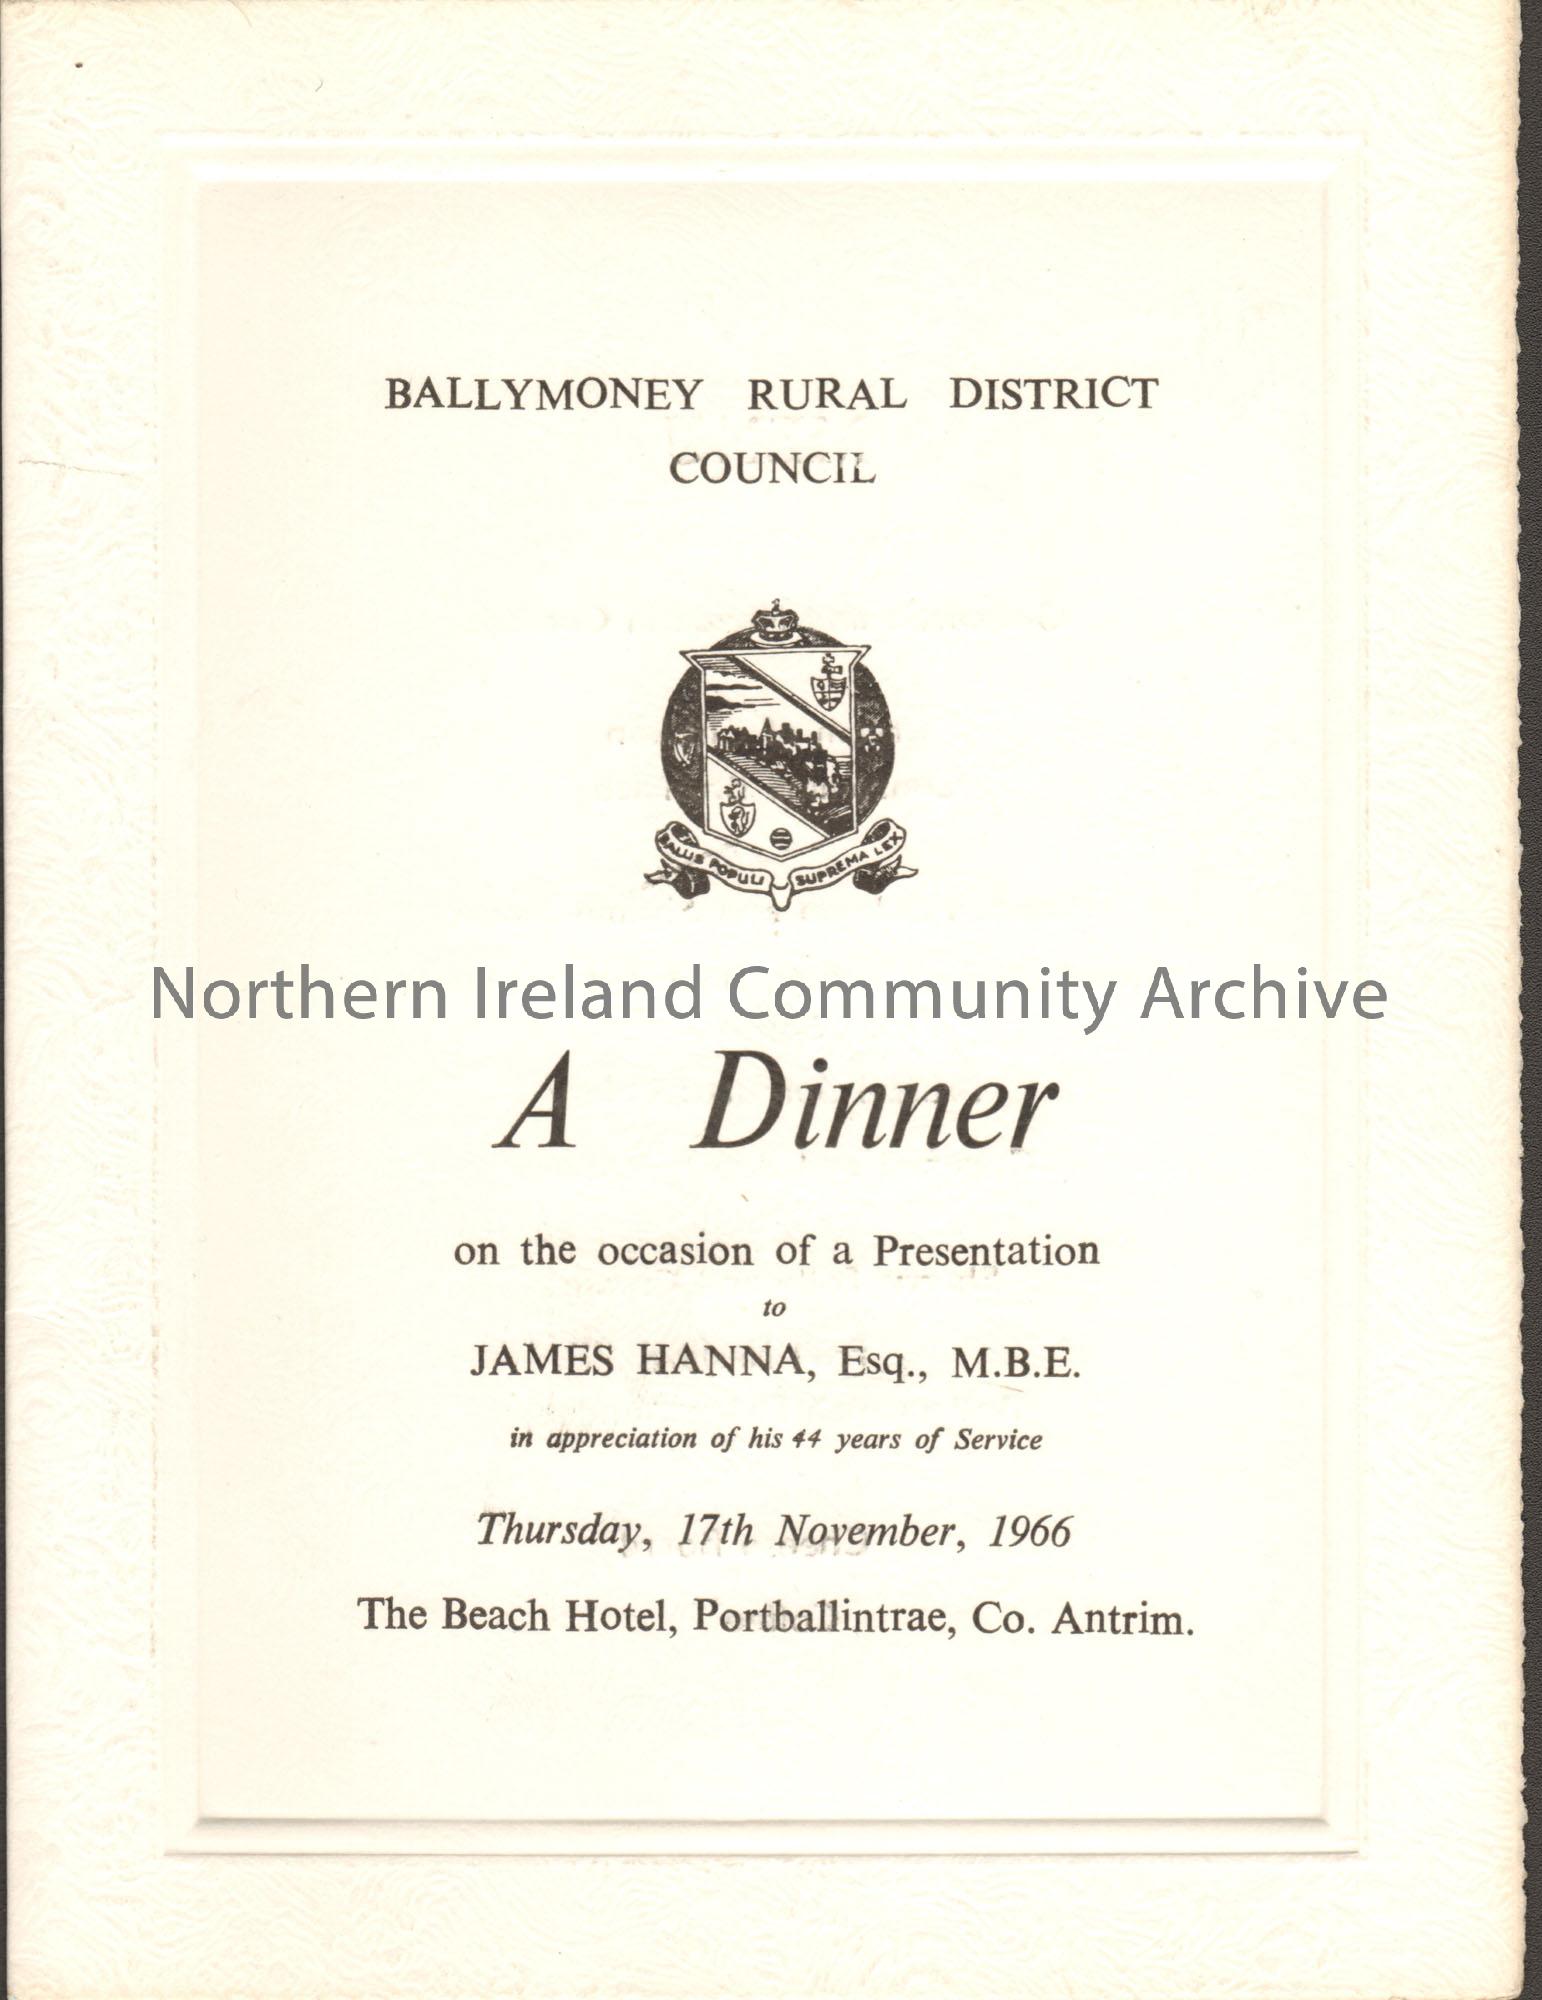 White menu with crest on the front on embossed card. “Ballymoney Rural Council. A Dinner on the occasion of a presentation to James Hanna…”